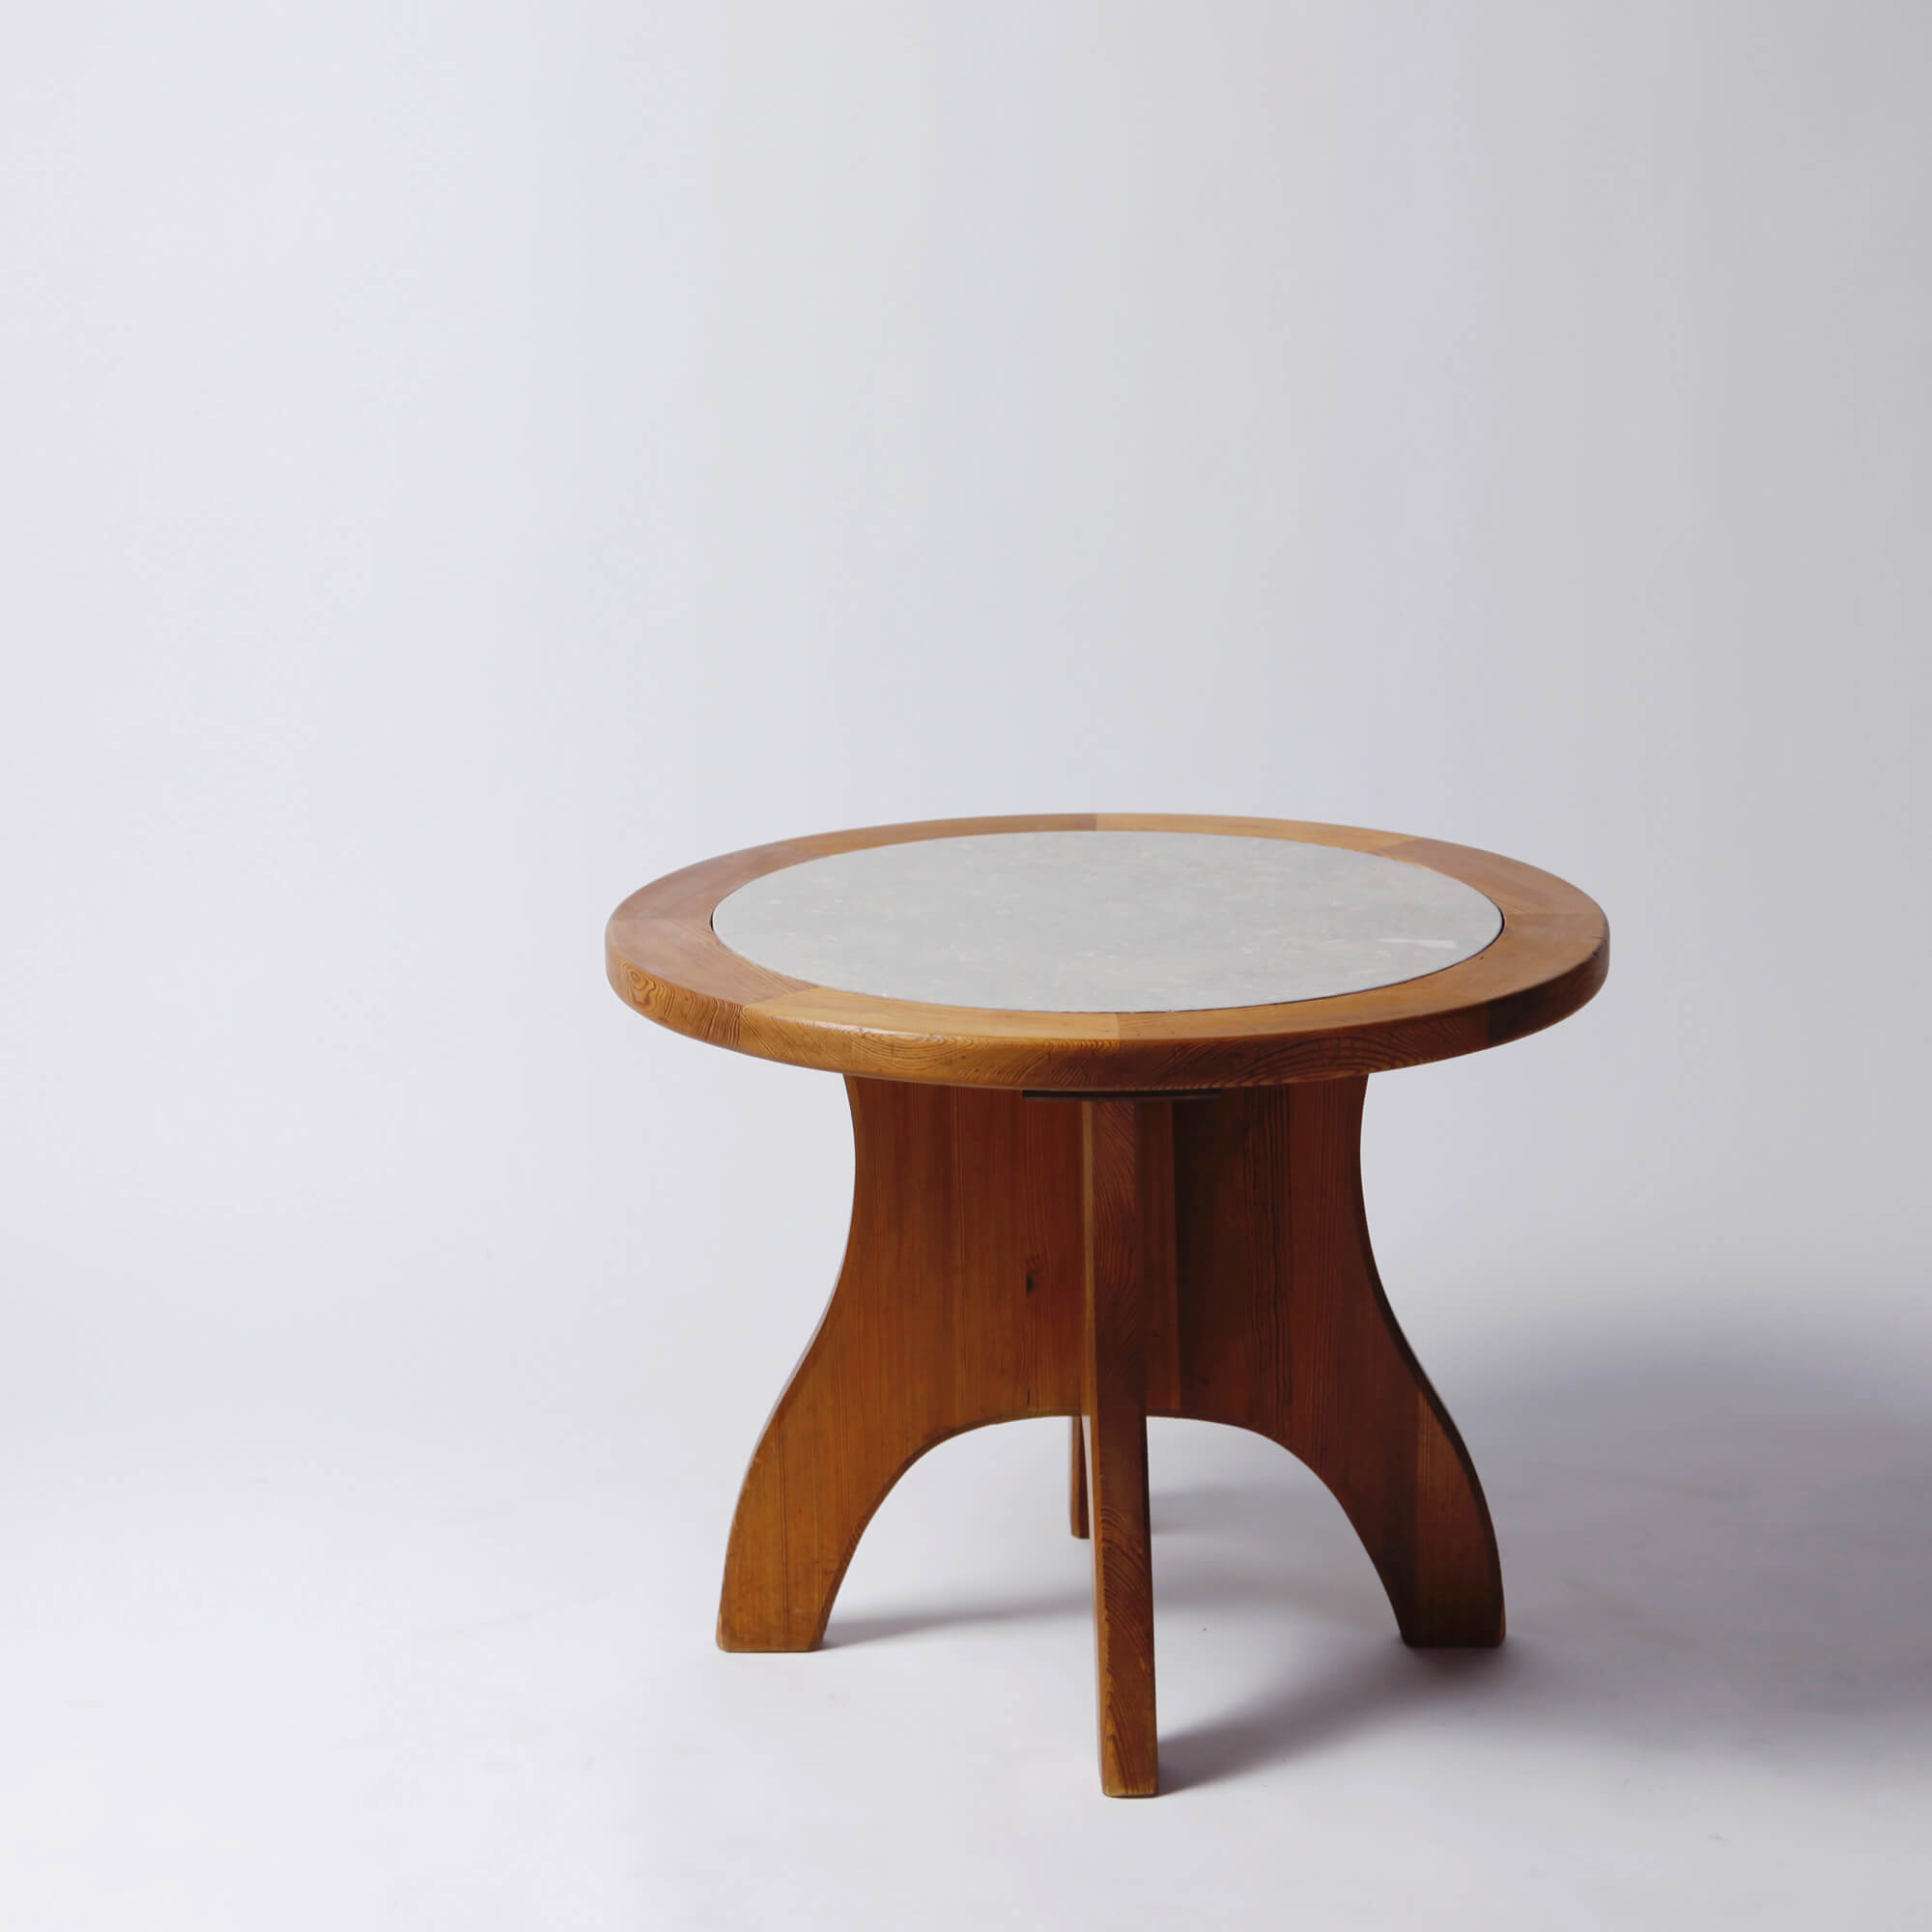 Circular Pine Table with Stone Top by David Rosén